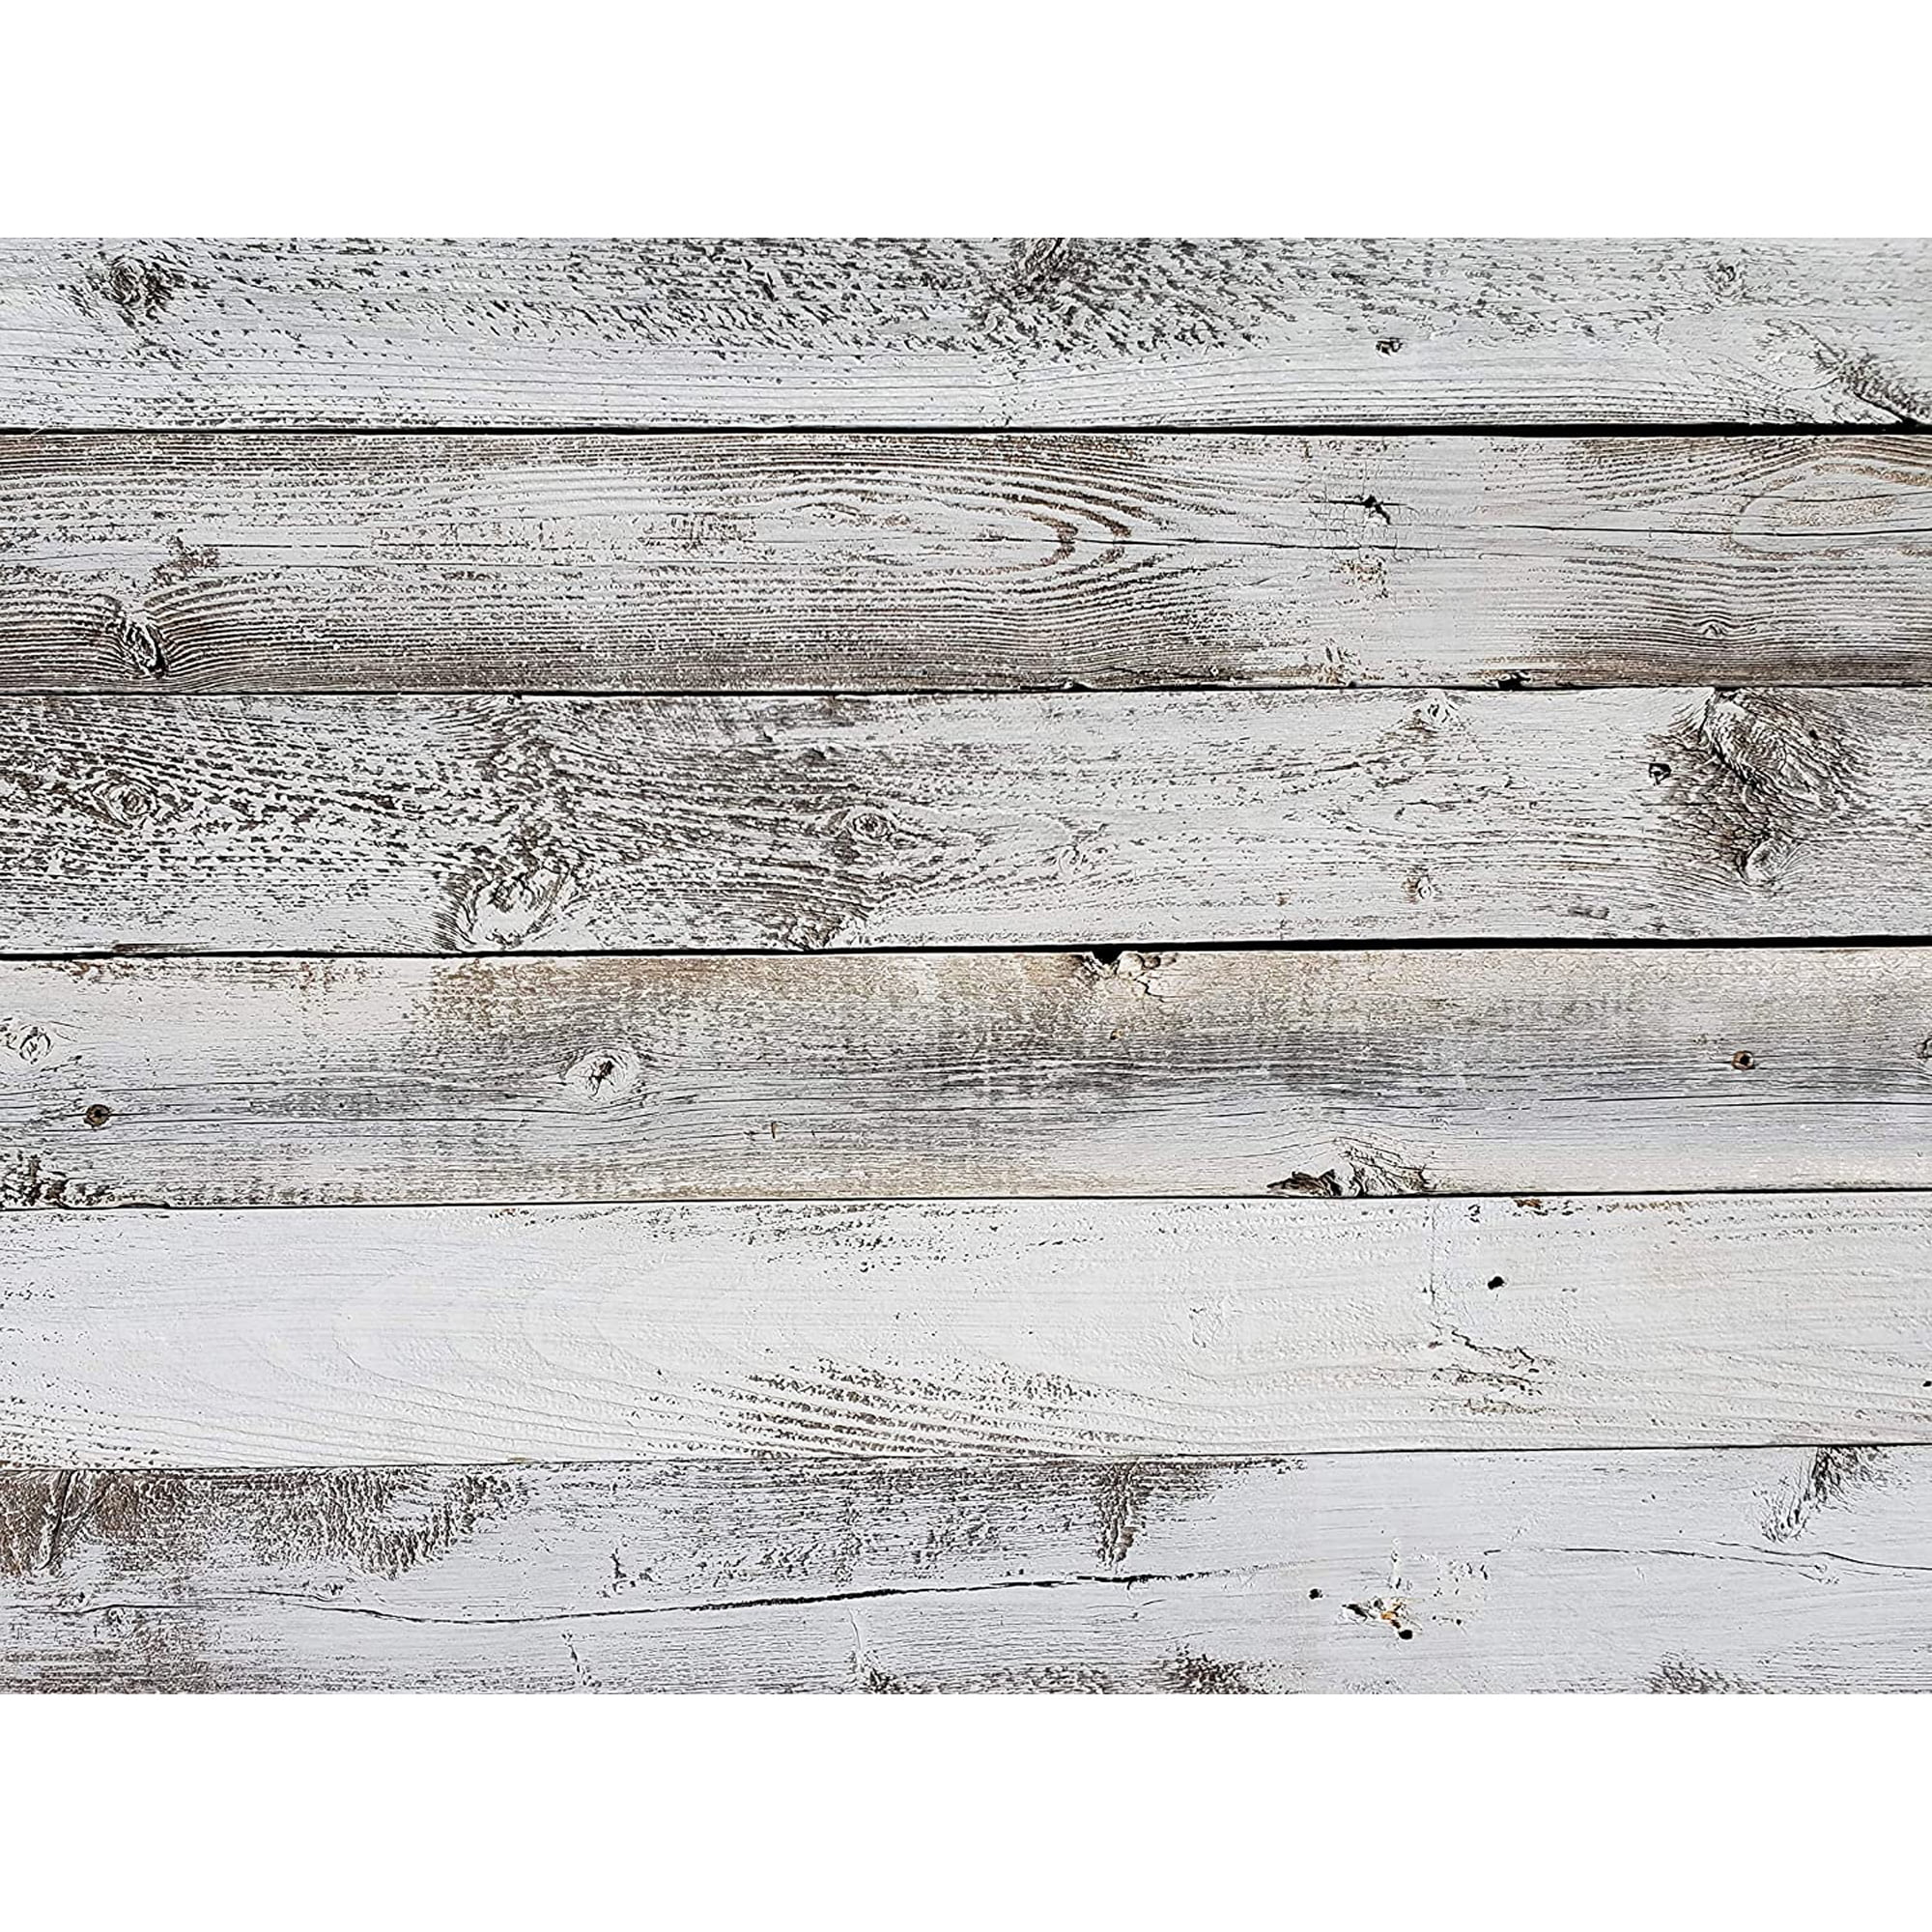 Rockin' Wood Real Wood Nail Up Application Rustic Reclaimed Naturally Weathered Barn Wood Accent Paneling Board Planks for Home Walls, 104 Square